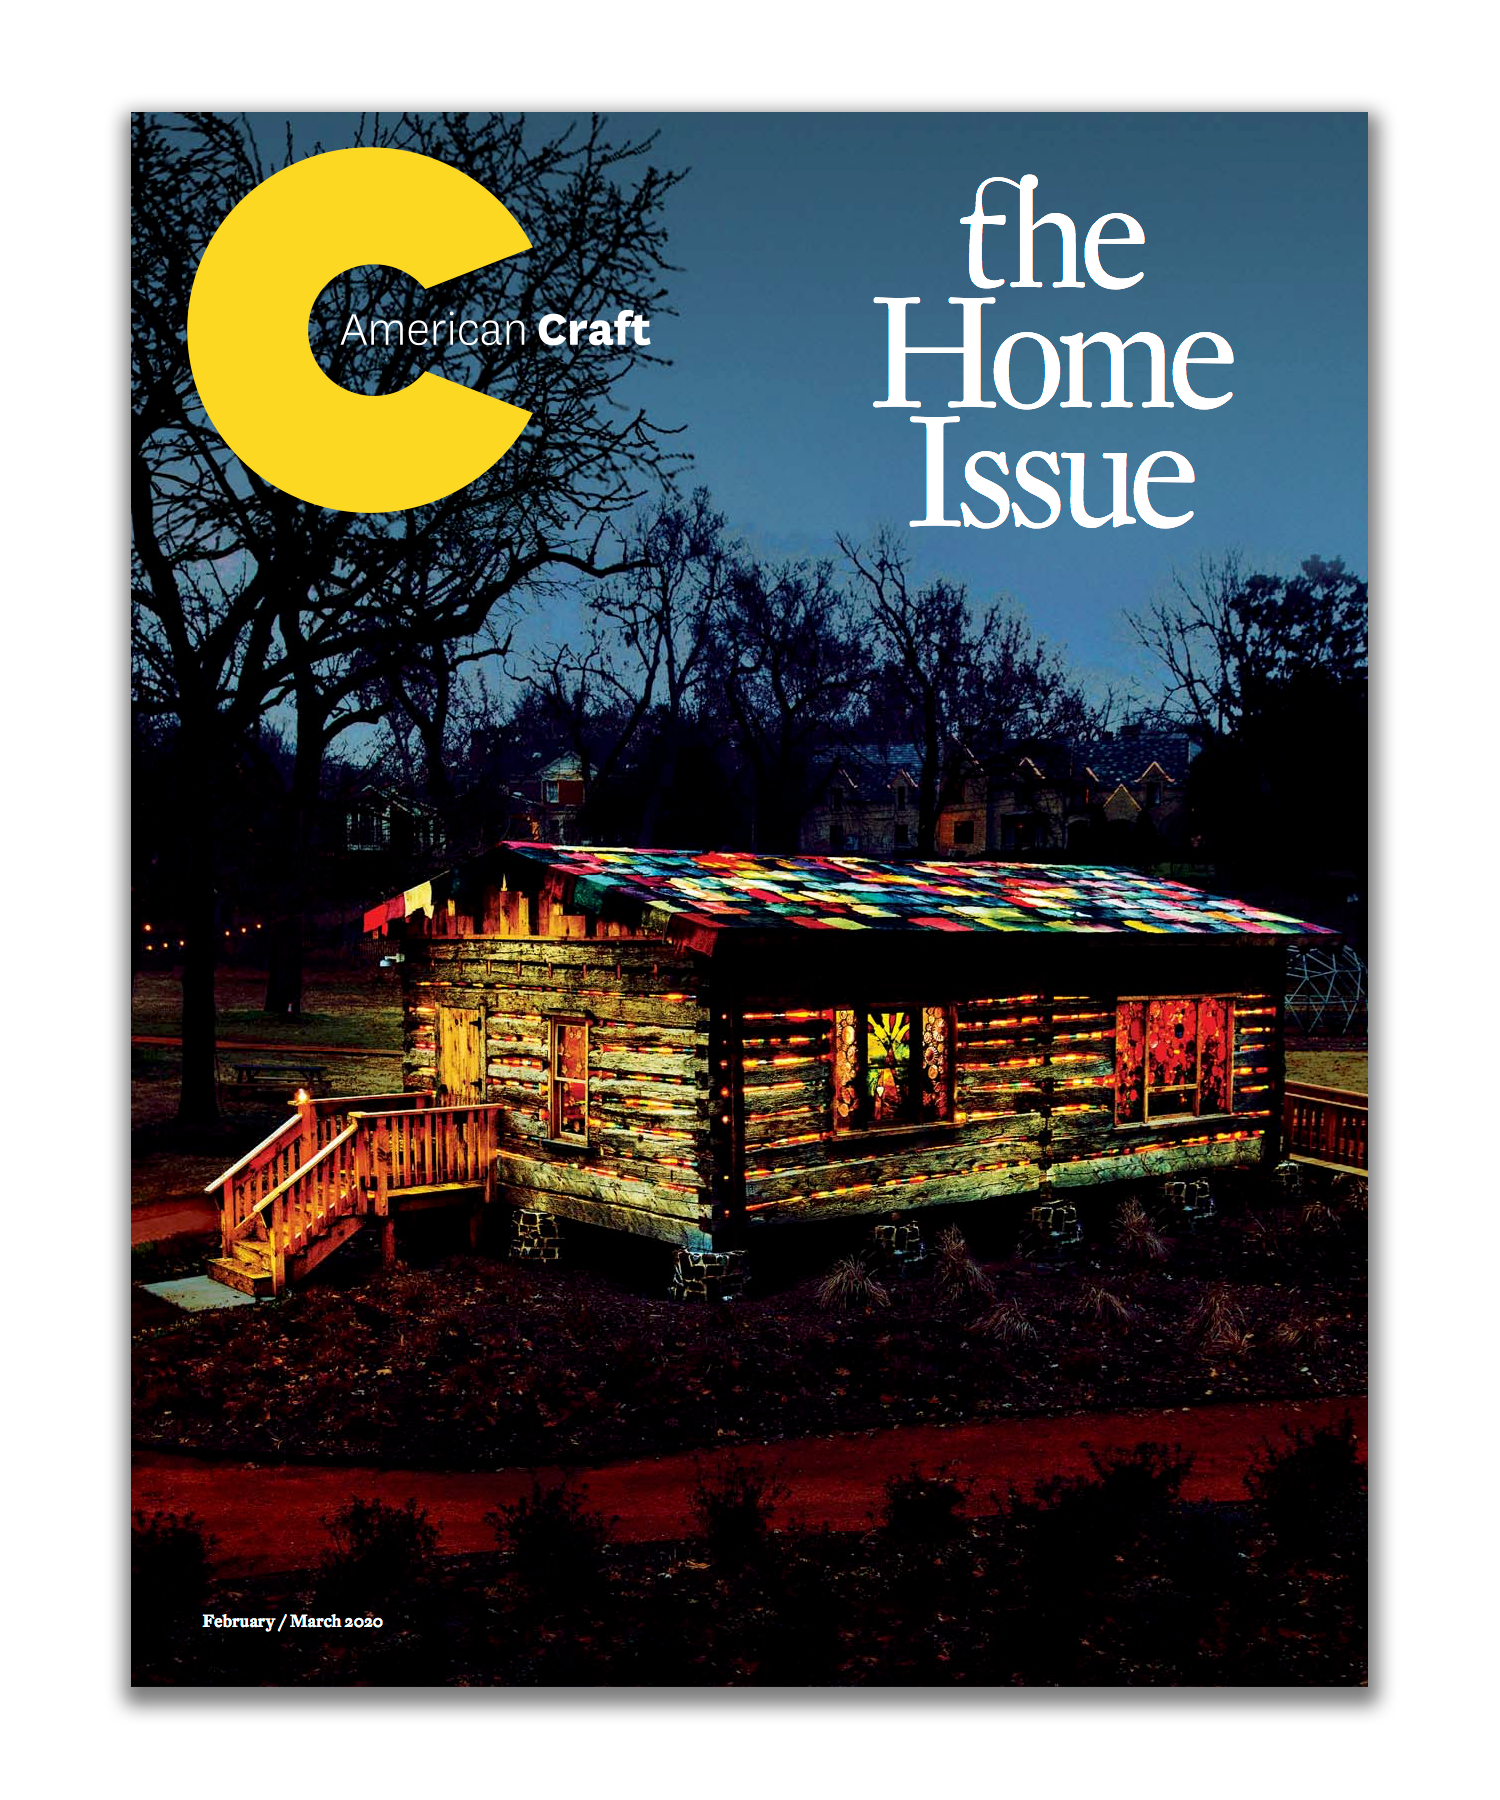 Home issue of American Craft